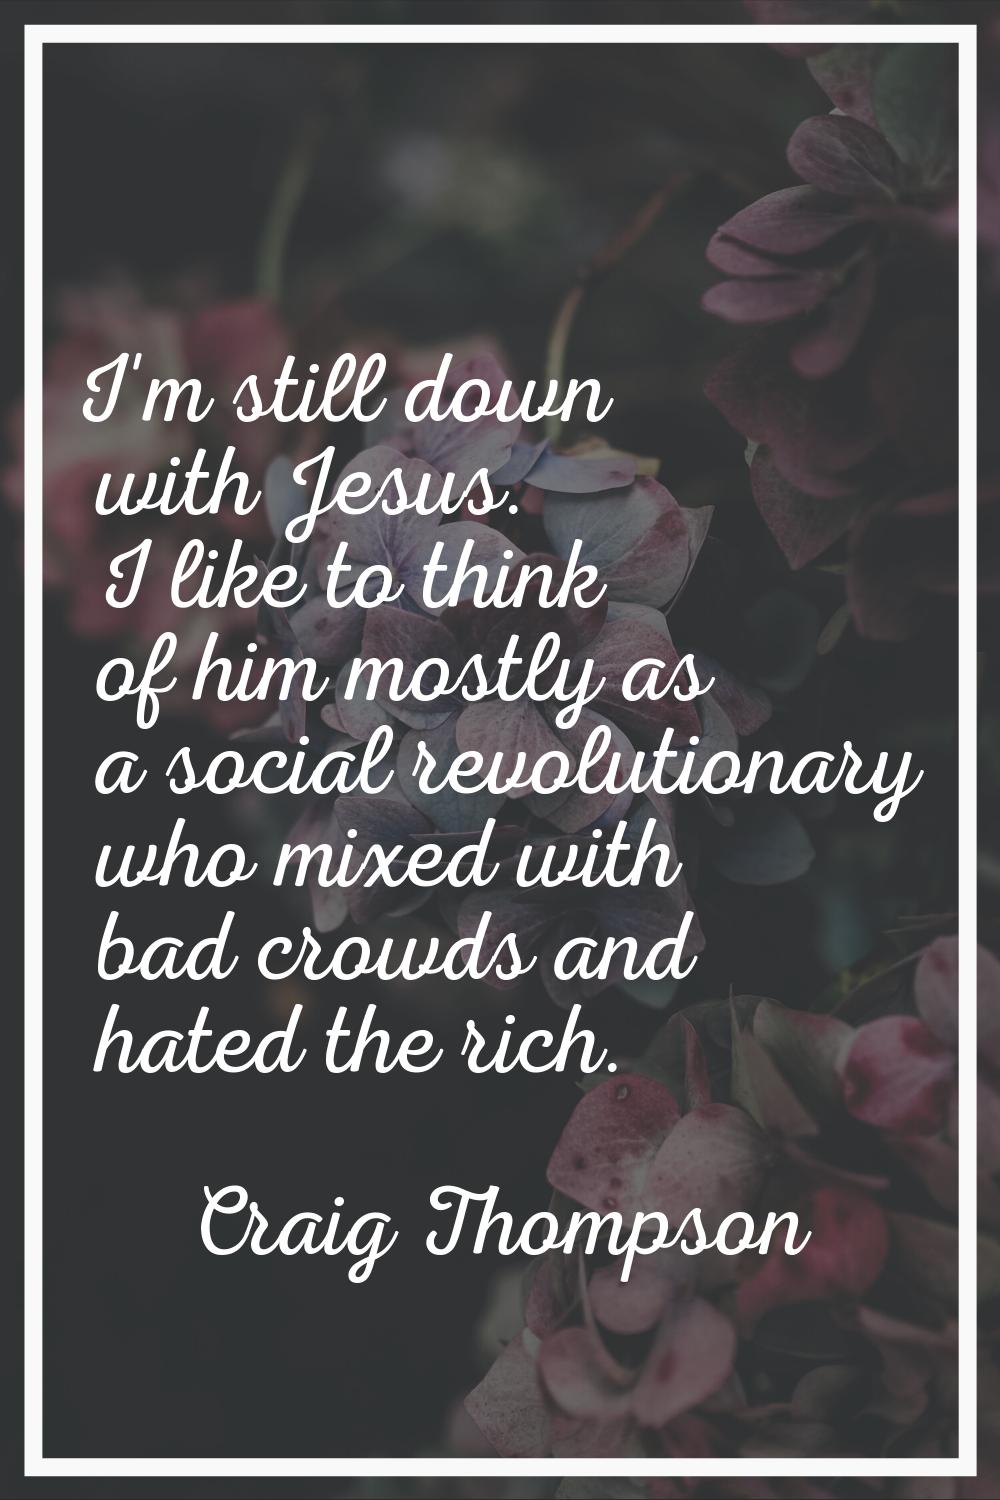 I'm still down with Jesus. I like to think of him mostly as a social revolutionary who mixed with b